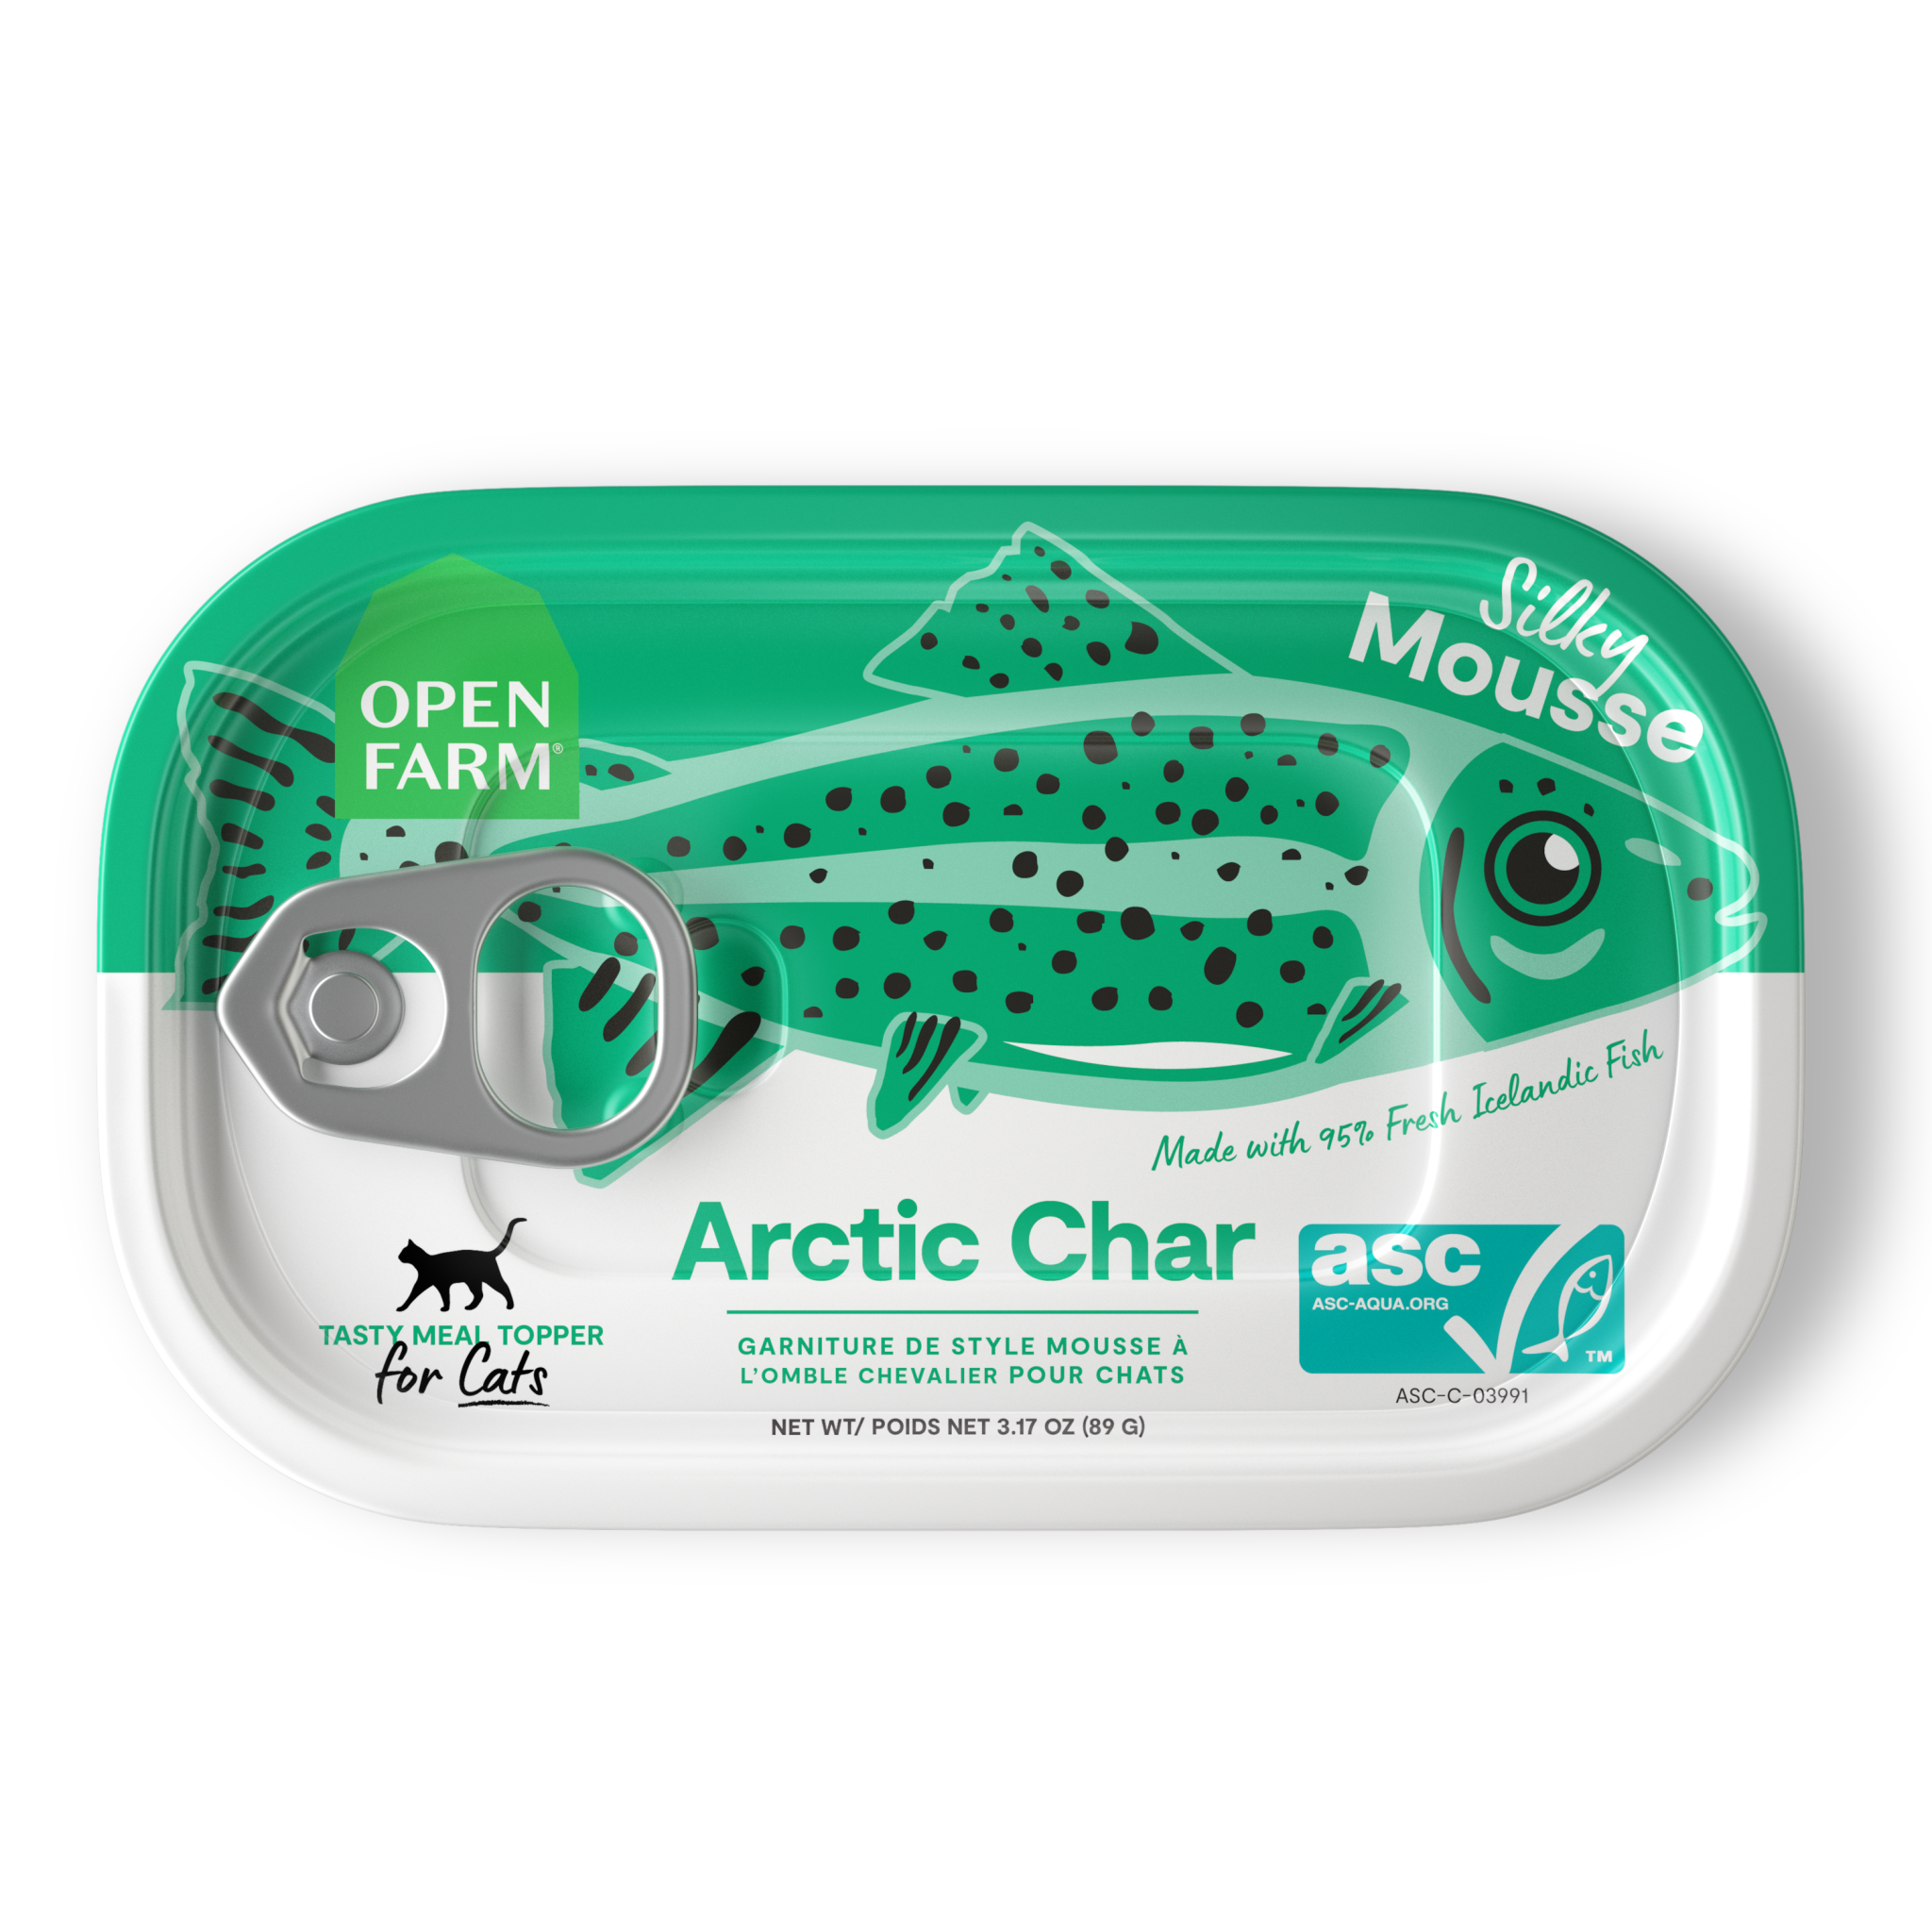 Artic Char Topper for Cats